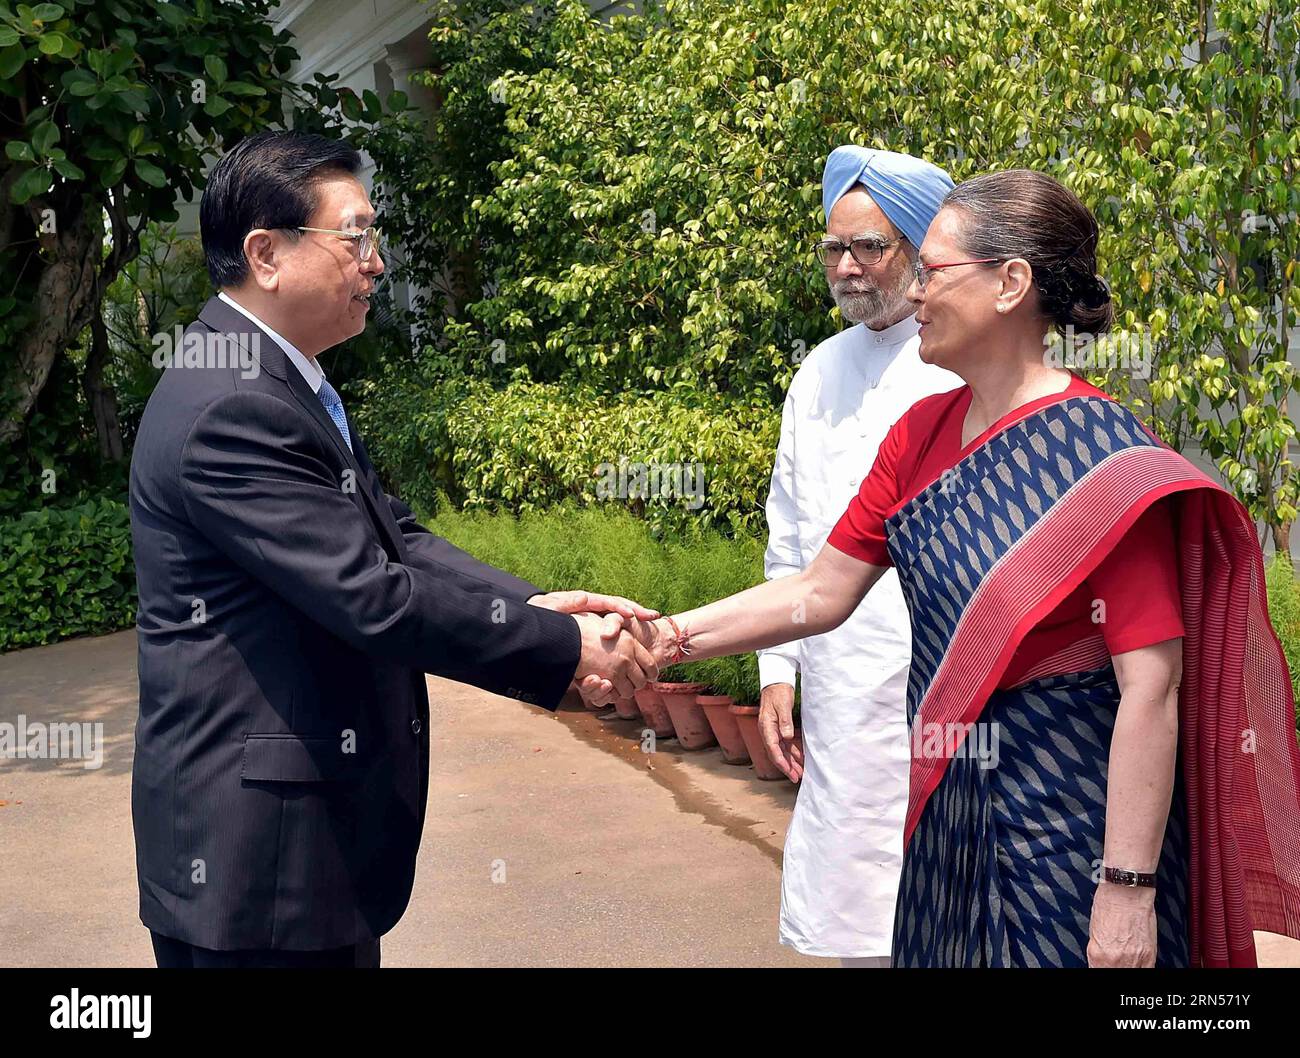 (150616) -- NEW DELHI, June 16, 2015 -- Zhang Dejiang (L), chairman of the Standing Committee of China s National People s Congress, meets with Sonia Gandhi (1st R), president of the Indian National Congress Party, and former Indian Prime Minister Manmohan Singh (2nd R) in New Delhi, India, June 16, 2015. ) (lfj) INDIA-CHINA-ZHANG DEJIANG-MEETING LixTao PUBLICATIONxNOTxINxCHN   New Delhi June 16 2015 Zhang Dejiang l Chairman of The thing Committee of China S National Celebrities S Congress Meets With Sonia Gandhi 1st r President of The Indian National Congress Party and Former Indian Prime Min Stock Photo